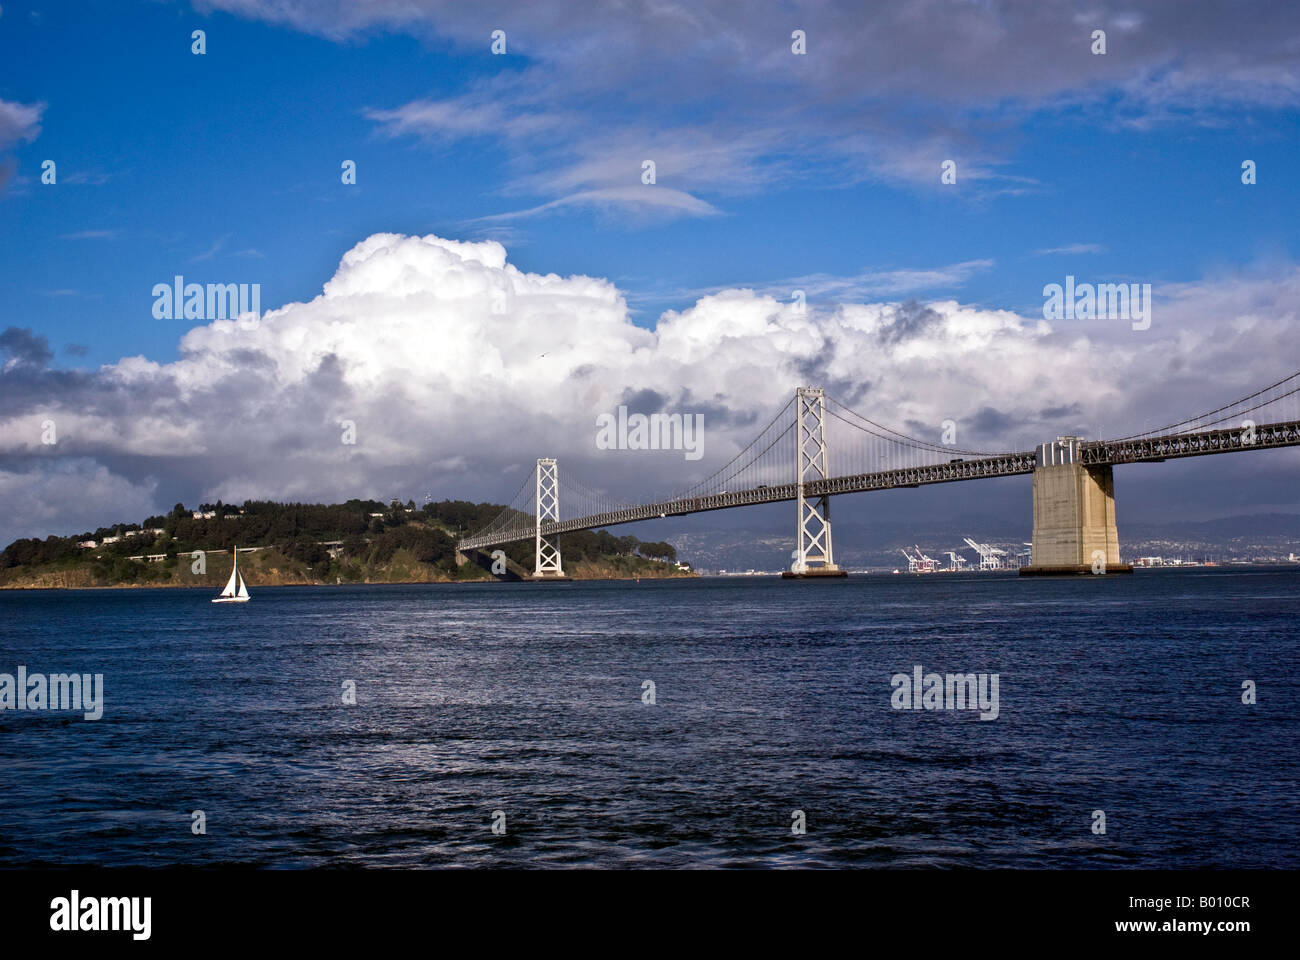 Distant view of SF Bay Bridge with a lone sailboat. Stock Photo